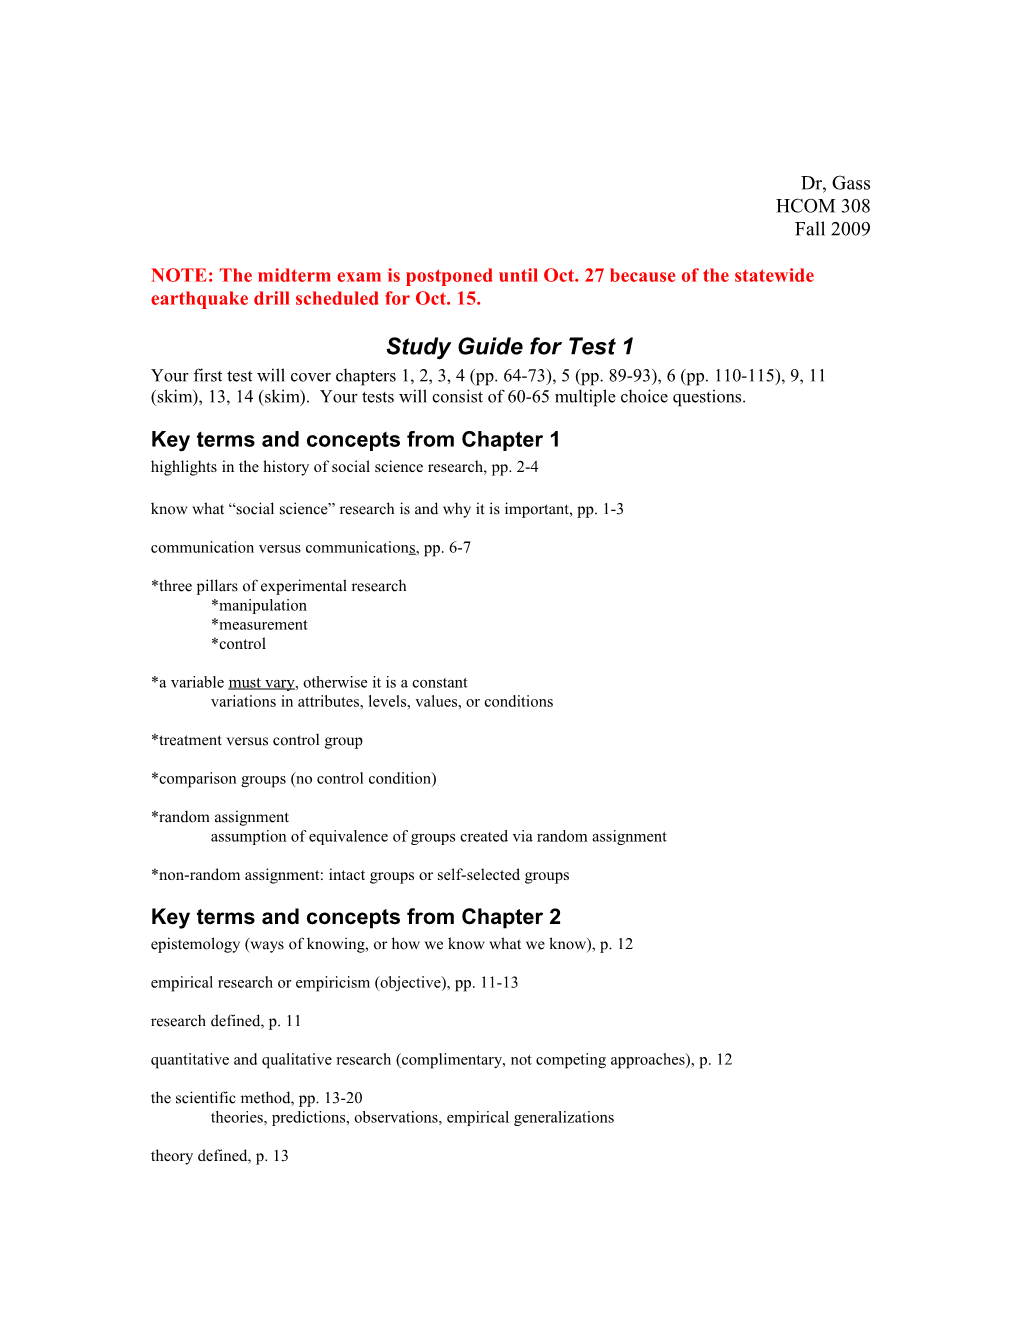 Midterm Study Guide s1